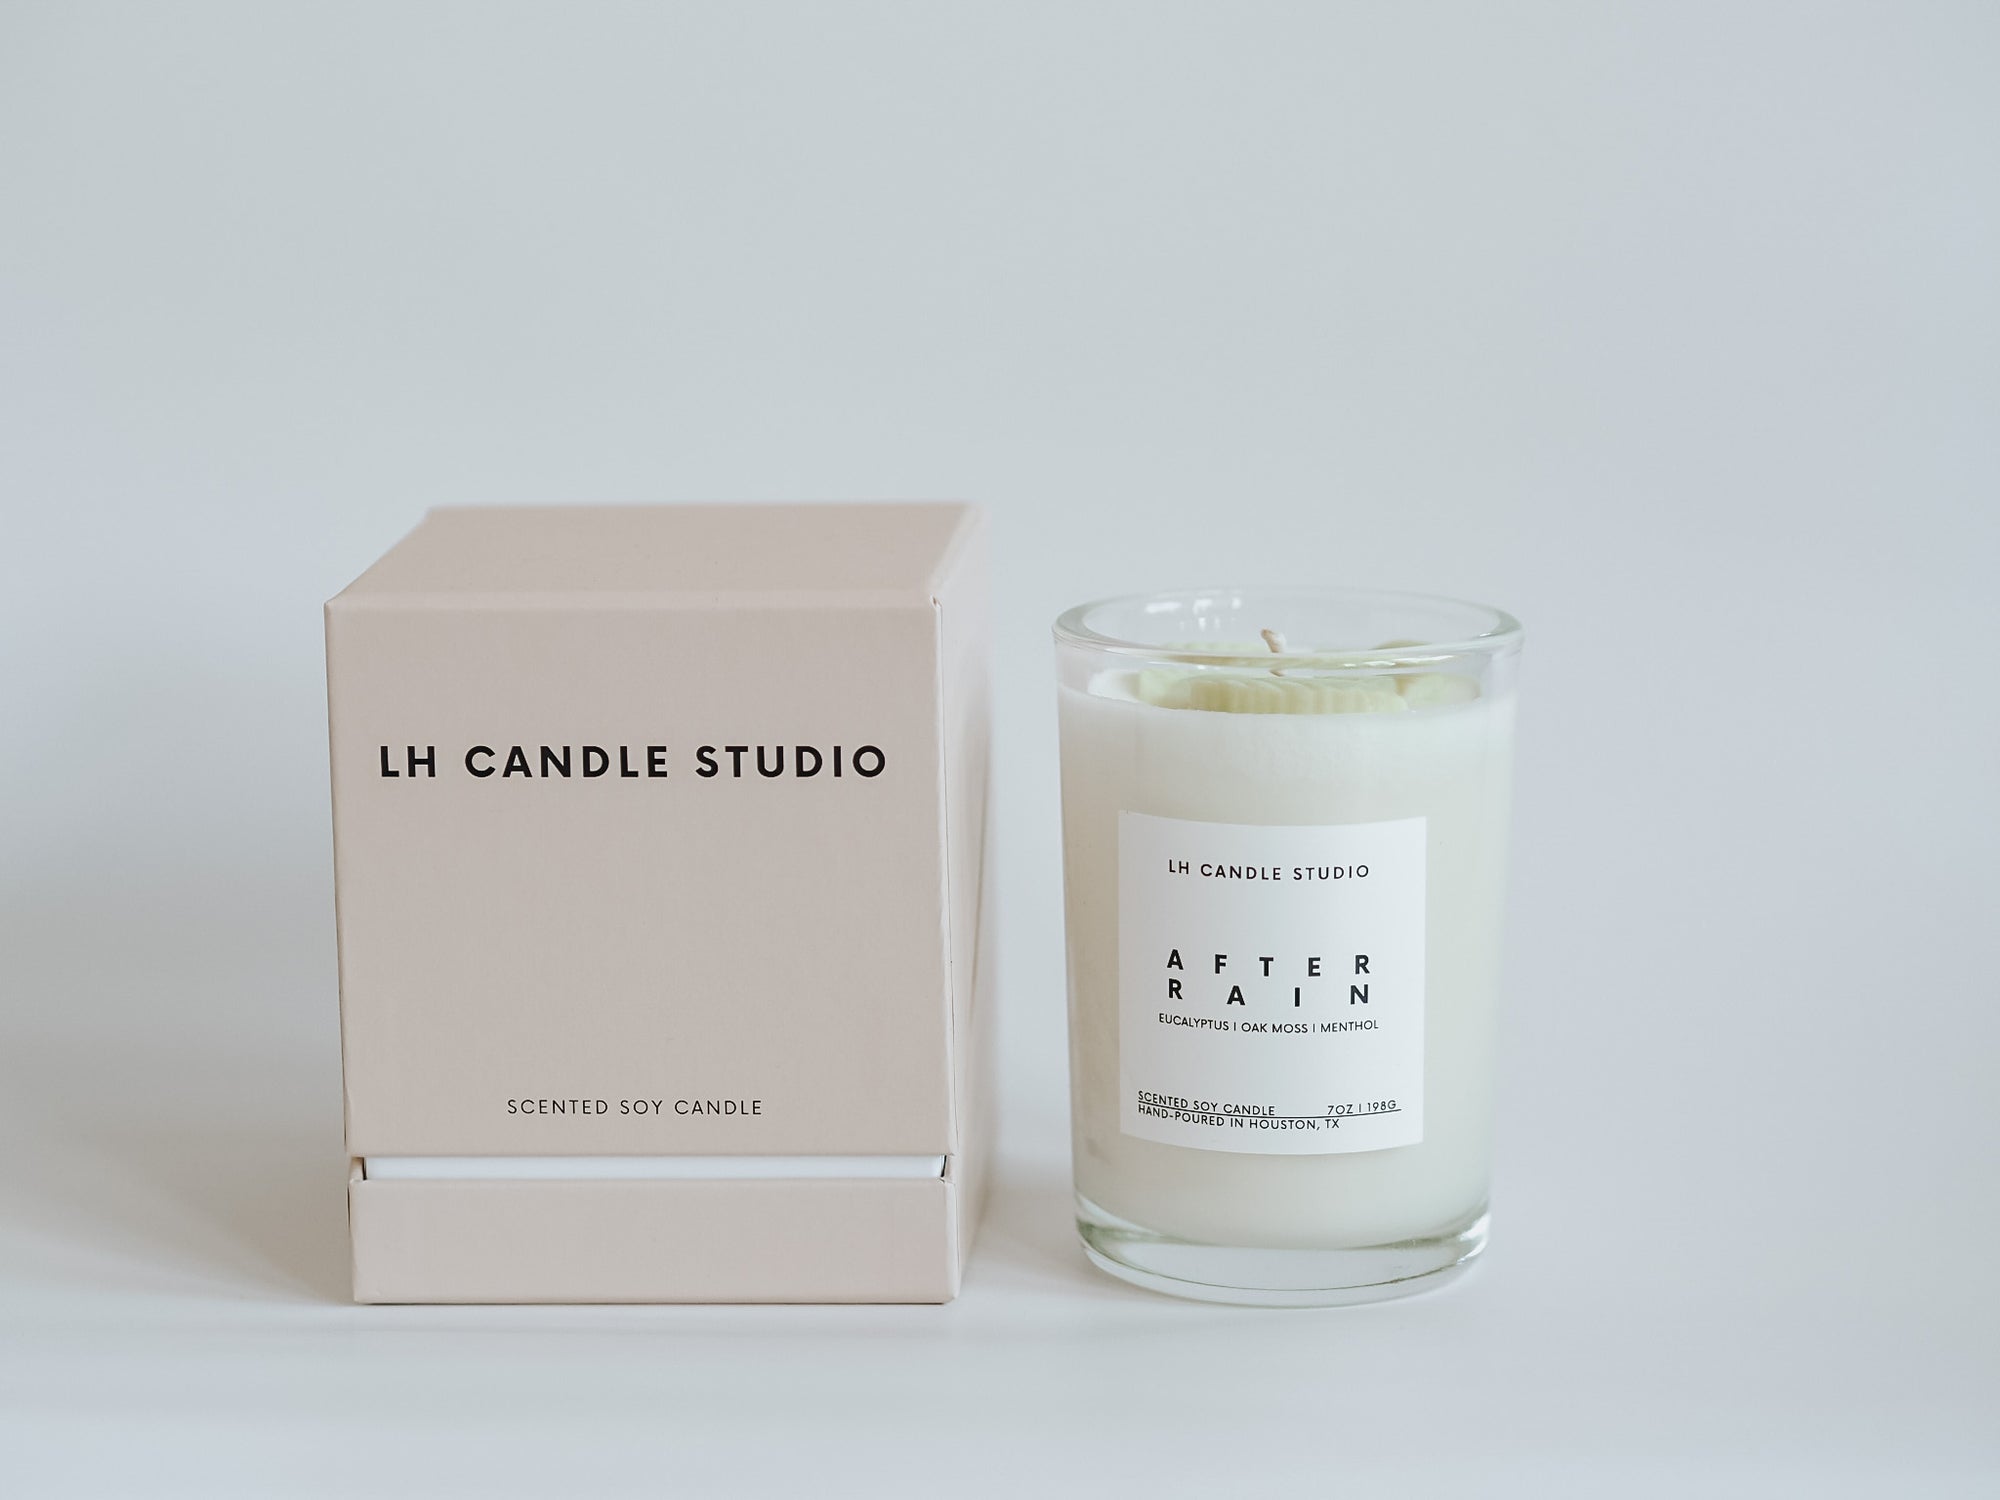 After Rain Candle - LH CANDLE STUDIO